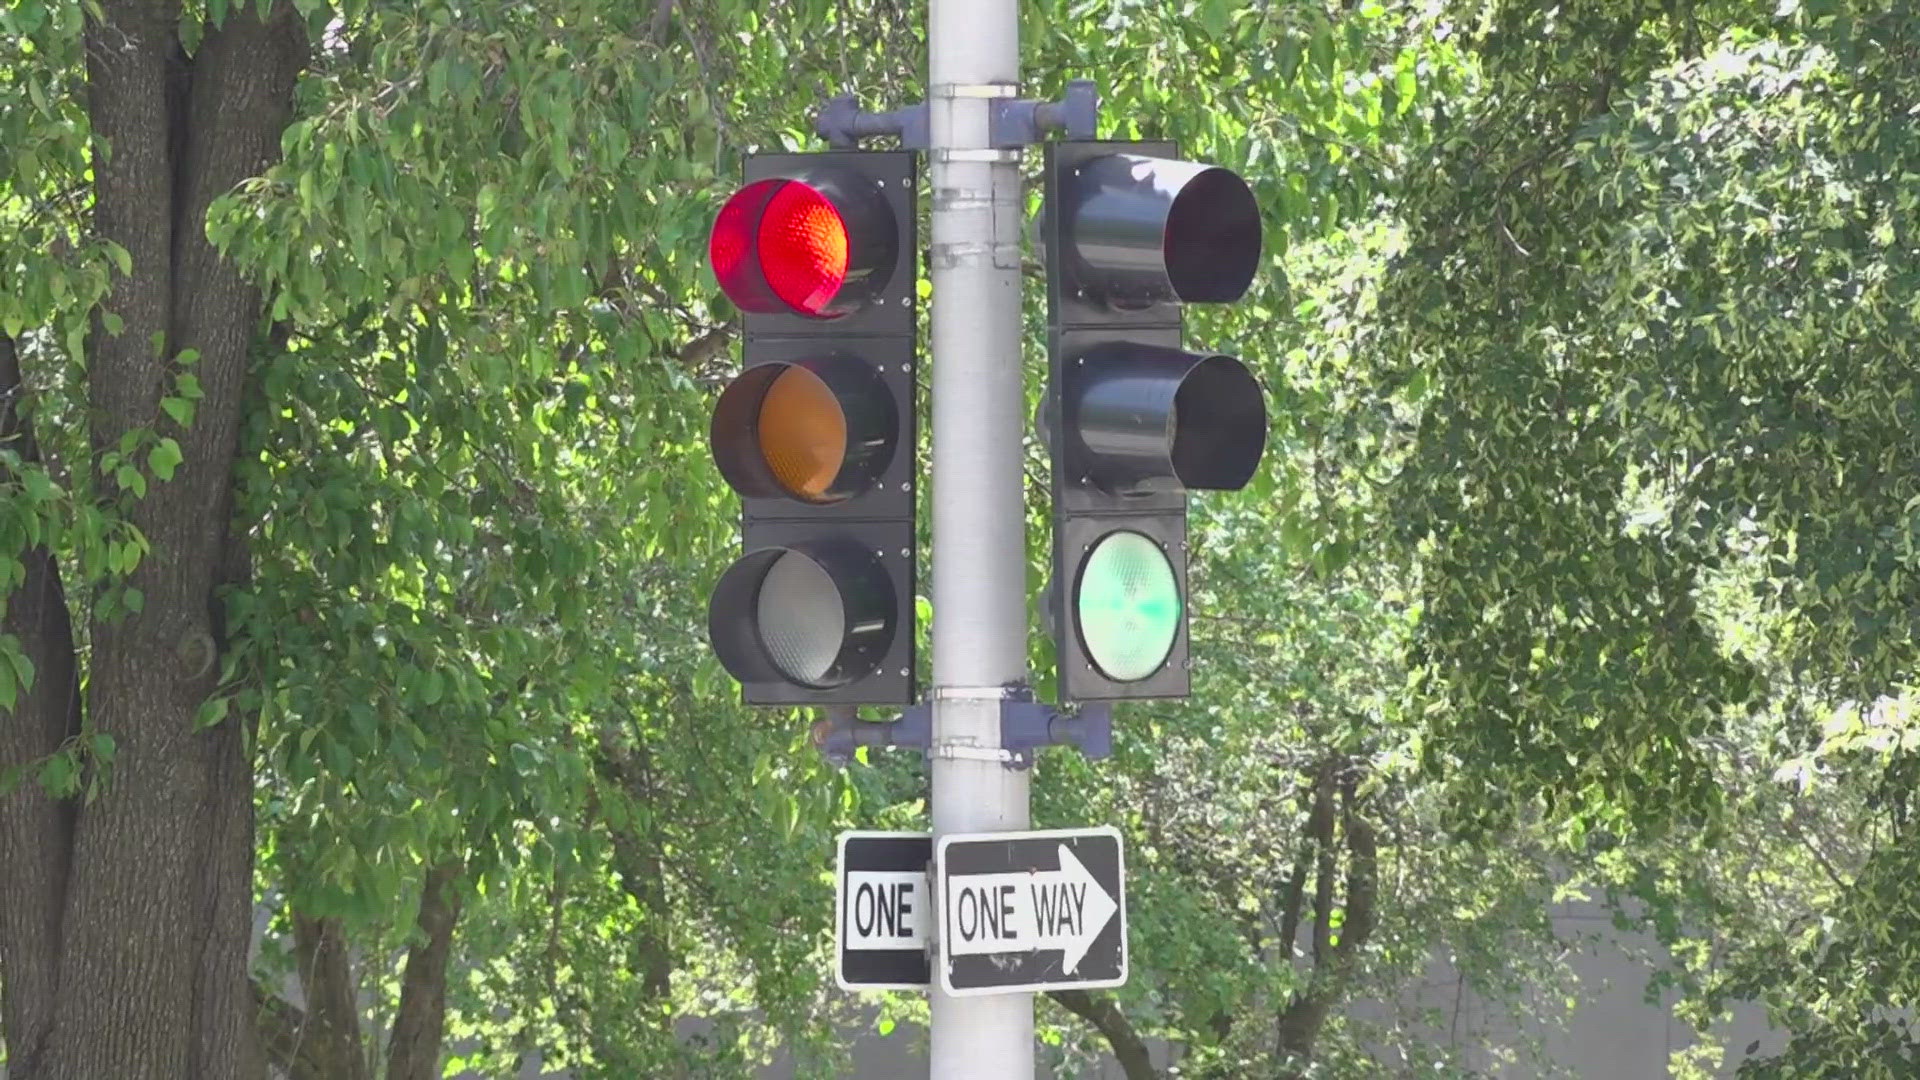 What's the science behind traffic signal timing? We went to traffic signal programmers in St. Louis and St. Louis County to find out.